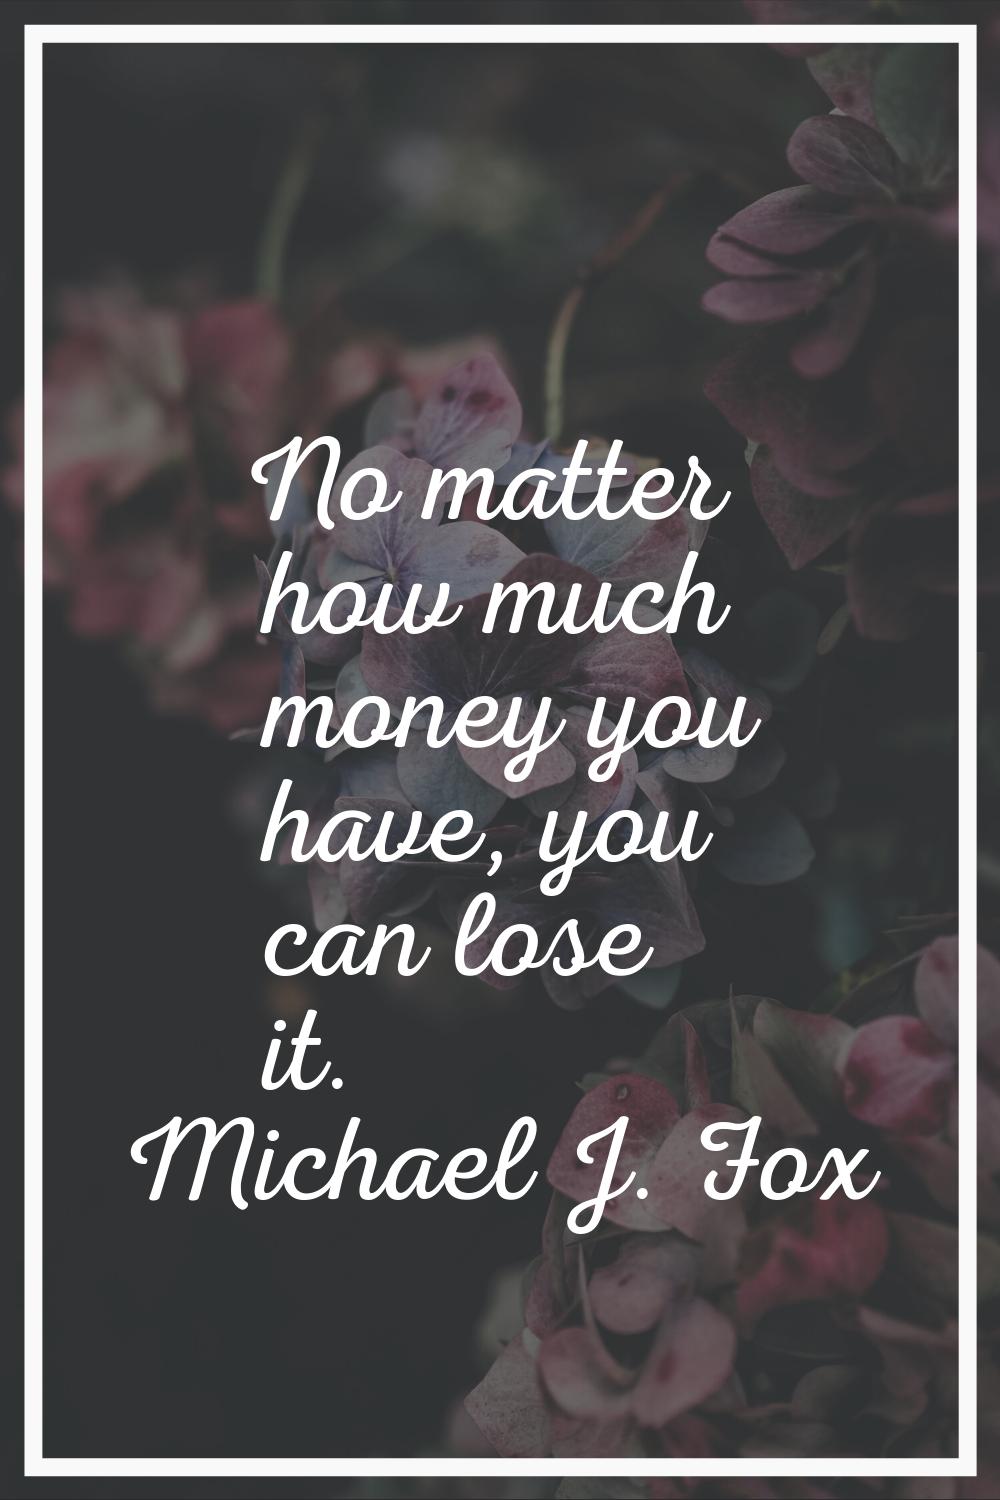 No matter how much money you have, you can lose it.